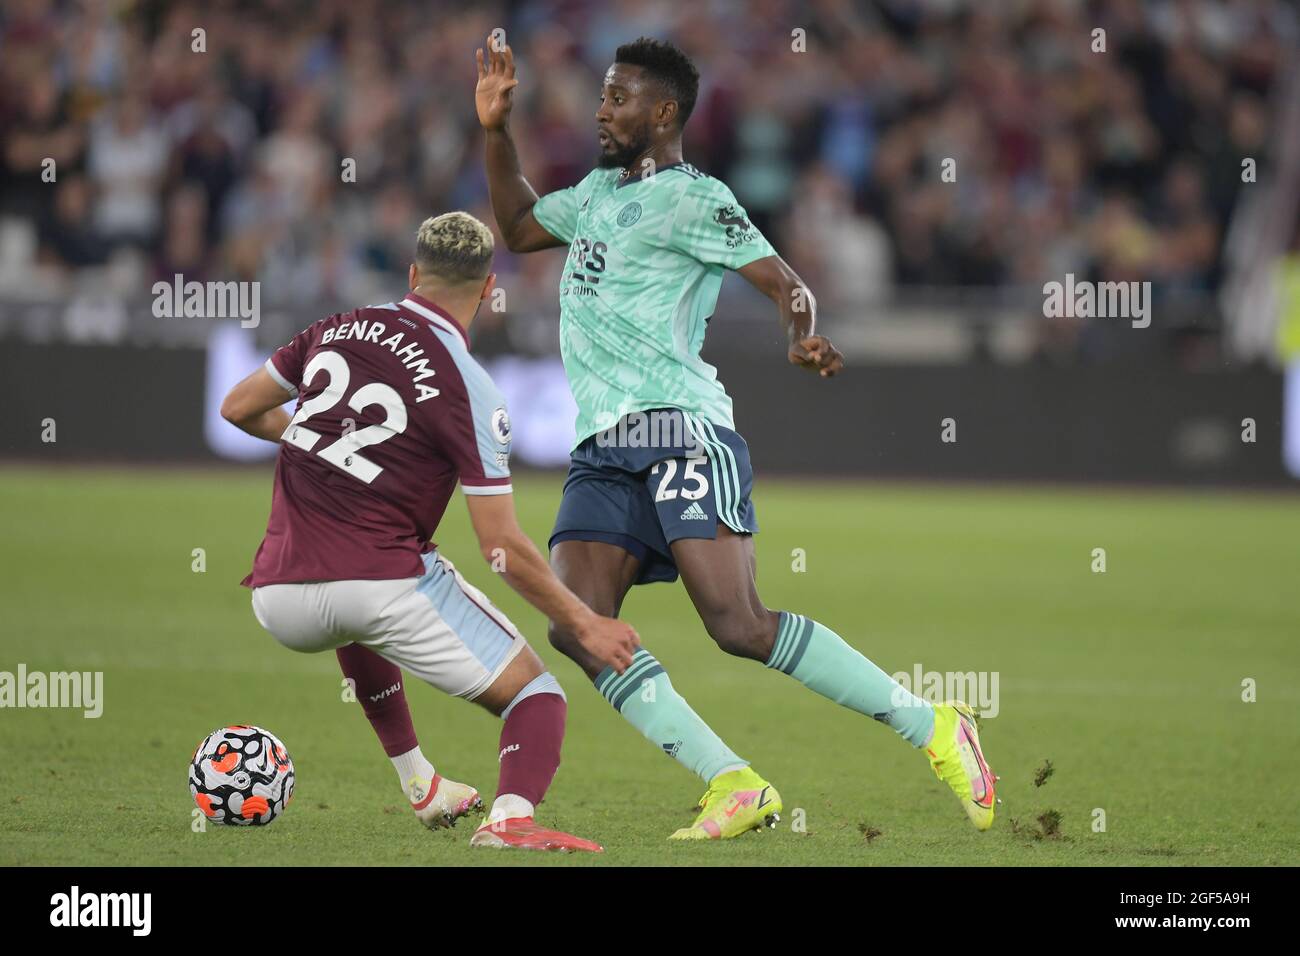 London, UK. 23rd Aug, 2021. 23rd August The London Stadium, Stratford London. Said Benrahma of West Ham Utd and Wilfred Ndidi of Leicester City during the West Ham vs Leicester City Premier League match at the London Stadium. Credit: MARTIN DALTON/Alamy Live News Stock Photo